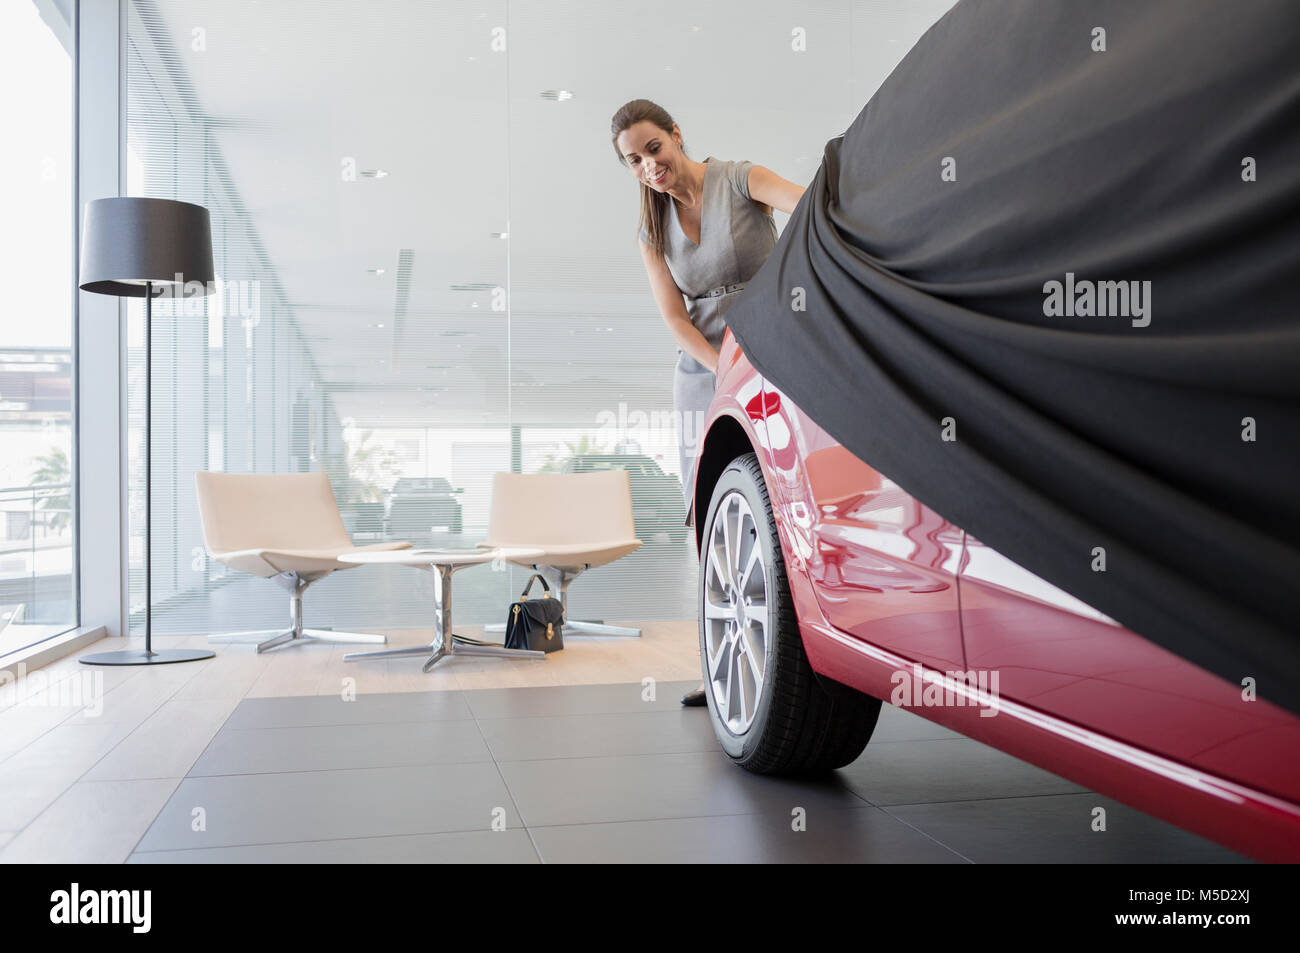 Car saleswoman removing cover from new car in car dealership showroom Stock Photo